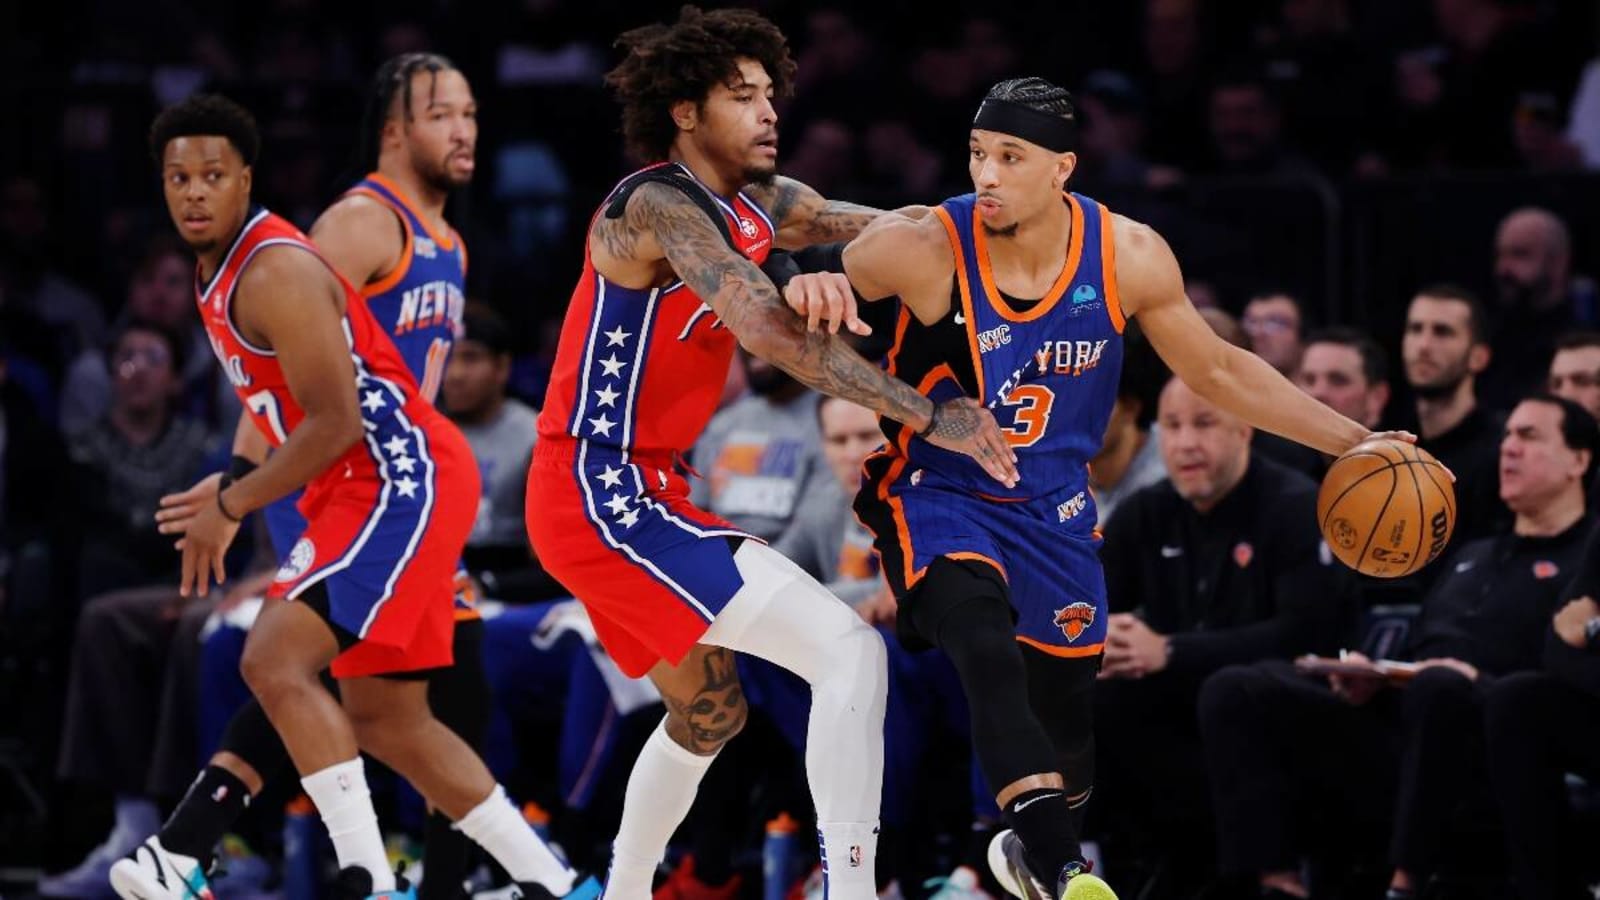 NBA best bets: 76ers vs. Knicks picks, prediction for Tuesday, March 12